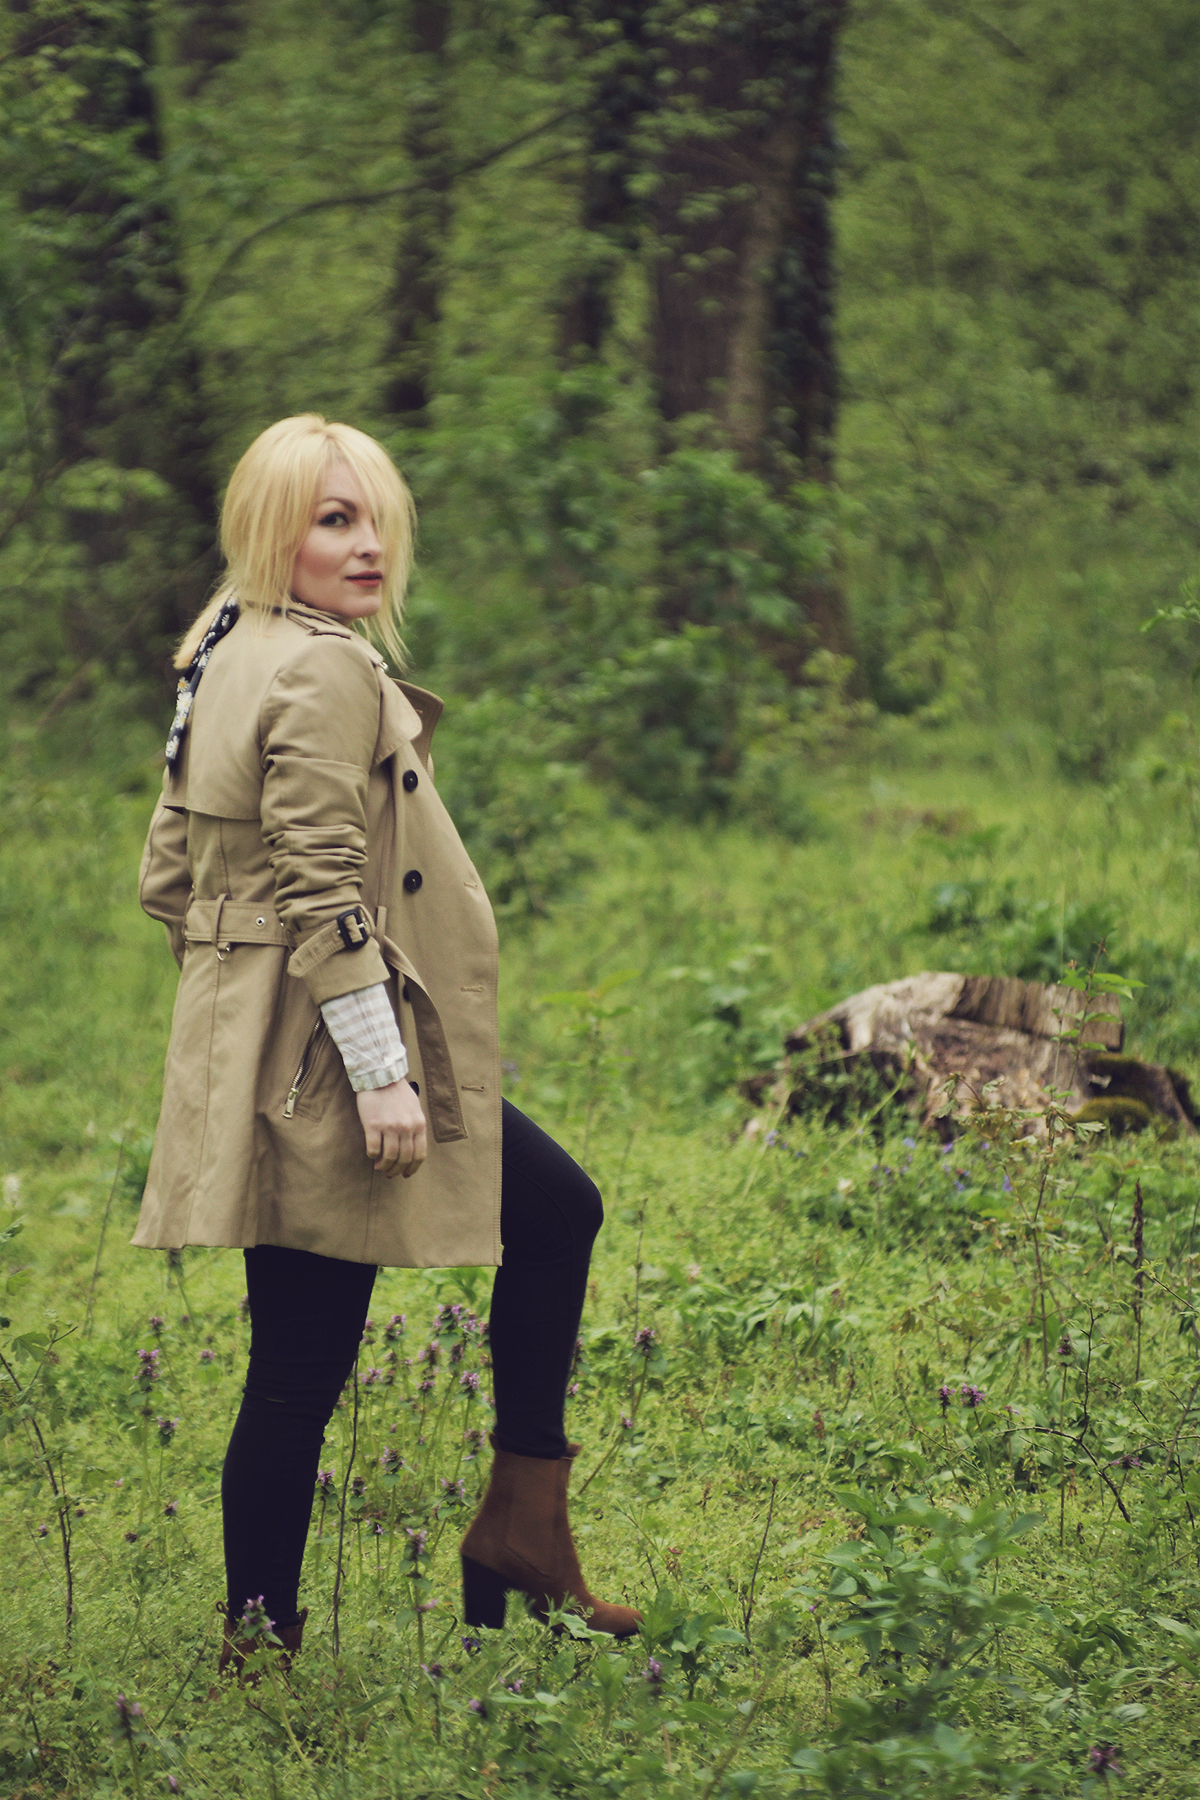 trench coat, jeans, suede boots, daisy print hair scarf, spring, spring look, into the woods